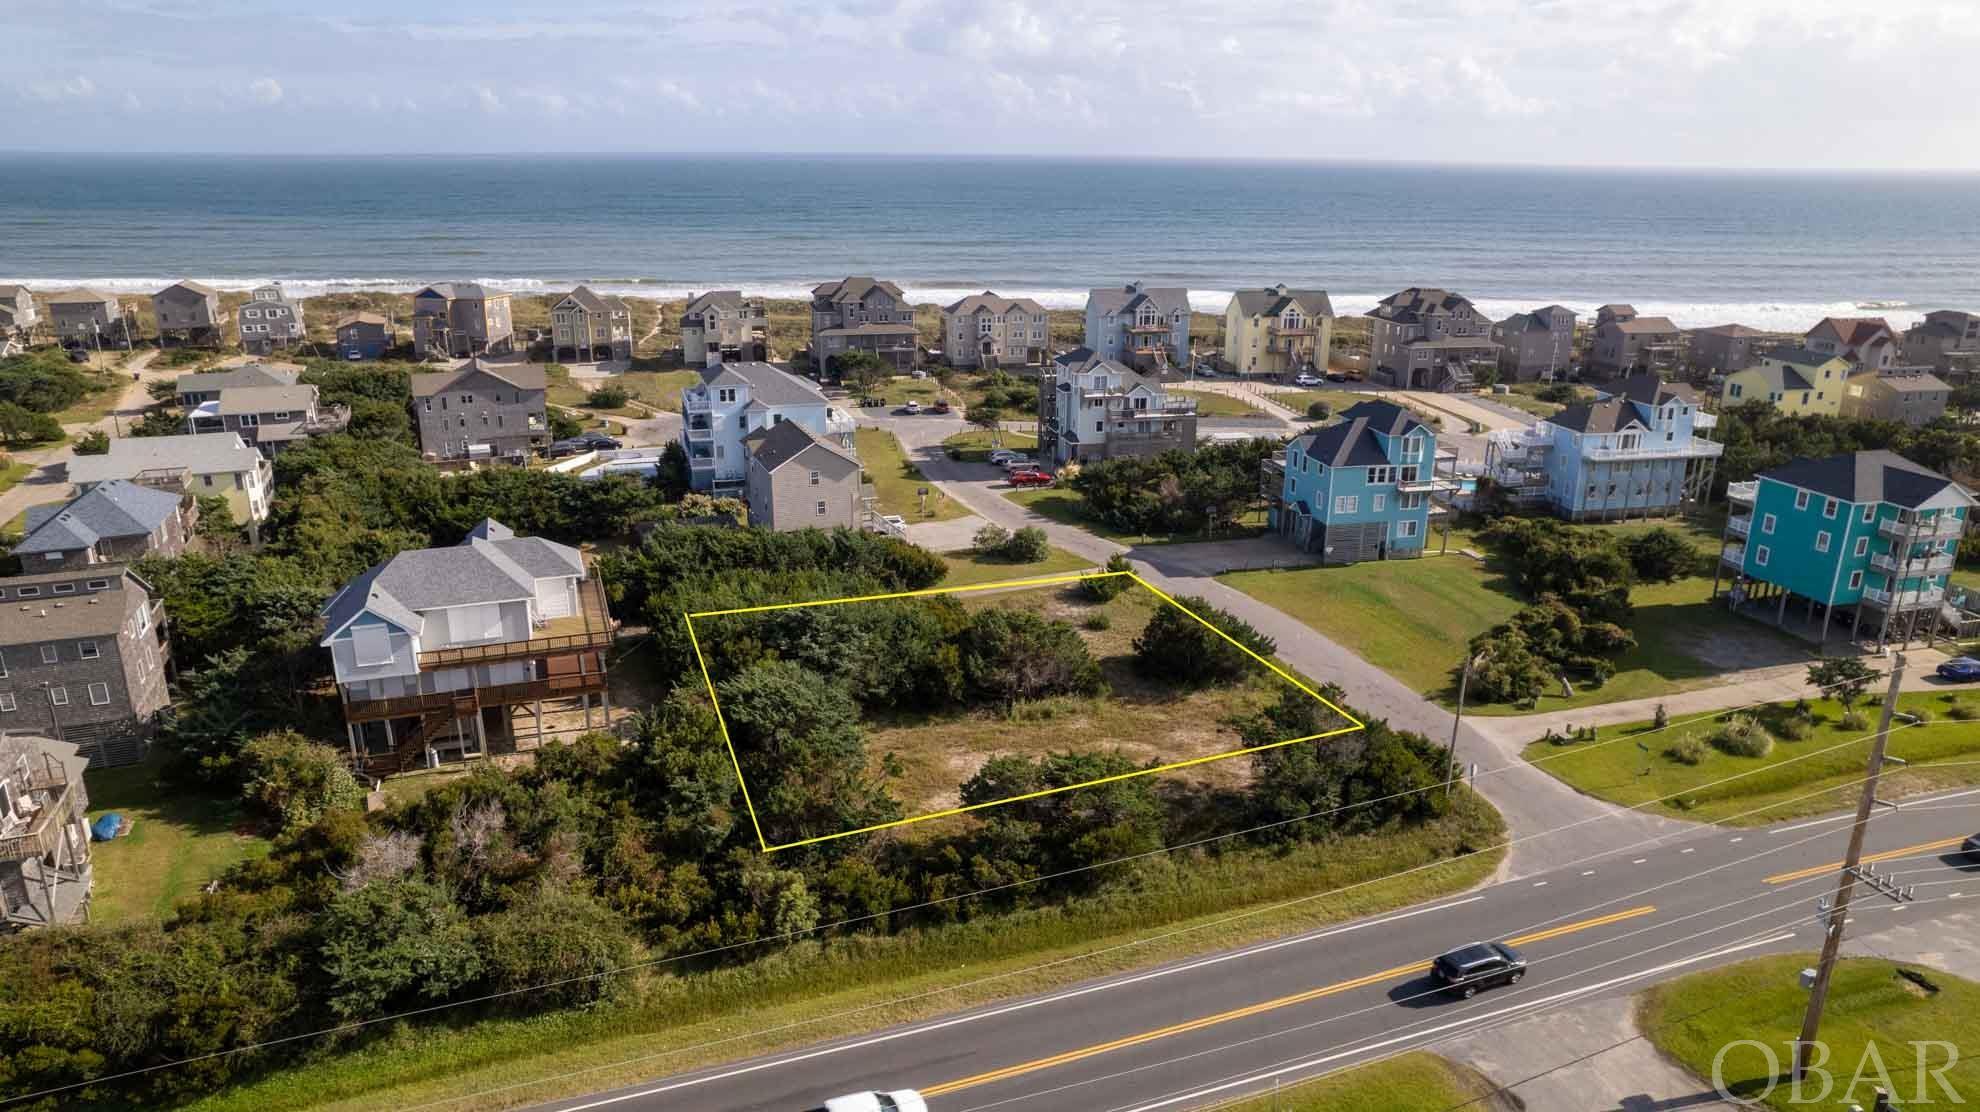 Third lot back from the oceanfront will have views of the ocean and the sound with quick and easy beach access. Note that some aerial photos were taken at 30 feet to show the probable view from your newly constructed beach home. It is a great lot in the Frisco beach area for a large home with driveway access on Tides Edge. Build what you want rather than trying to make do with an existing house in a market with very limited inventory. A 2022 Survey, soil testing, and subdivision covenants are available. Some selective lot clearing and loads of fill have been accomplished, leaving a nice buffer of trees for privacy. Tidesedge subdivision was established around 1999, requiring a minimum 1800 heated square feet. It's nicely paved roads and beautiful neighboring properties makes this one of Frisco's premier oceanside locations.